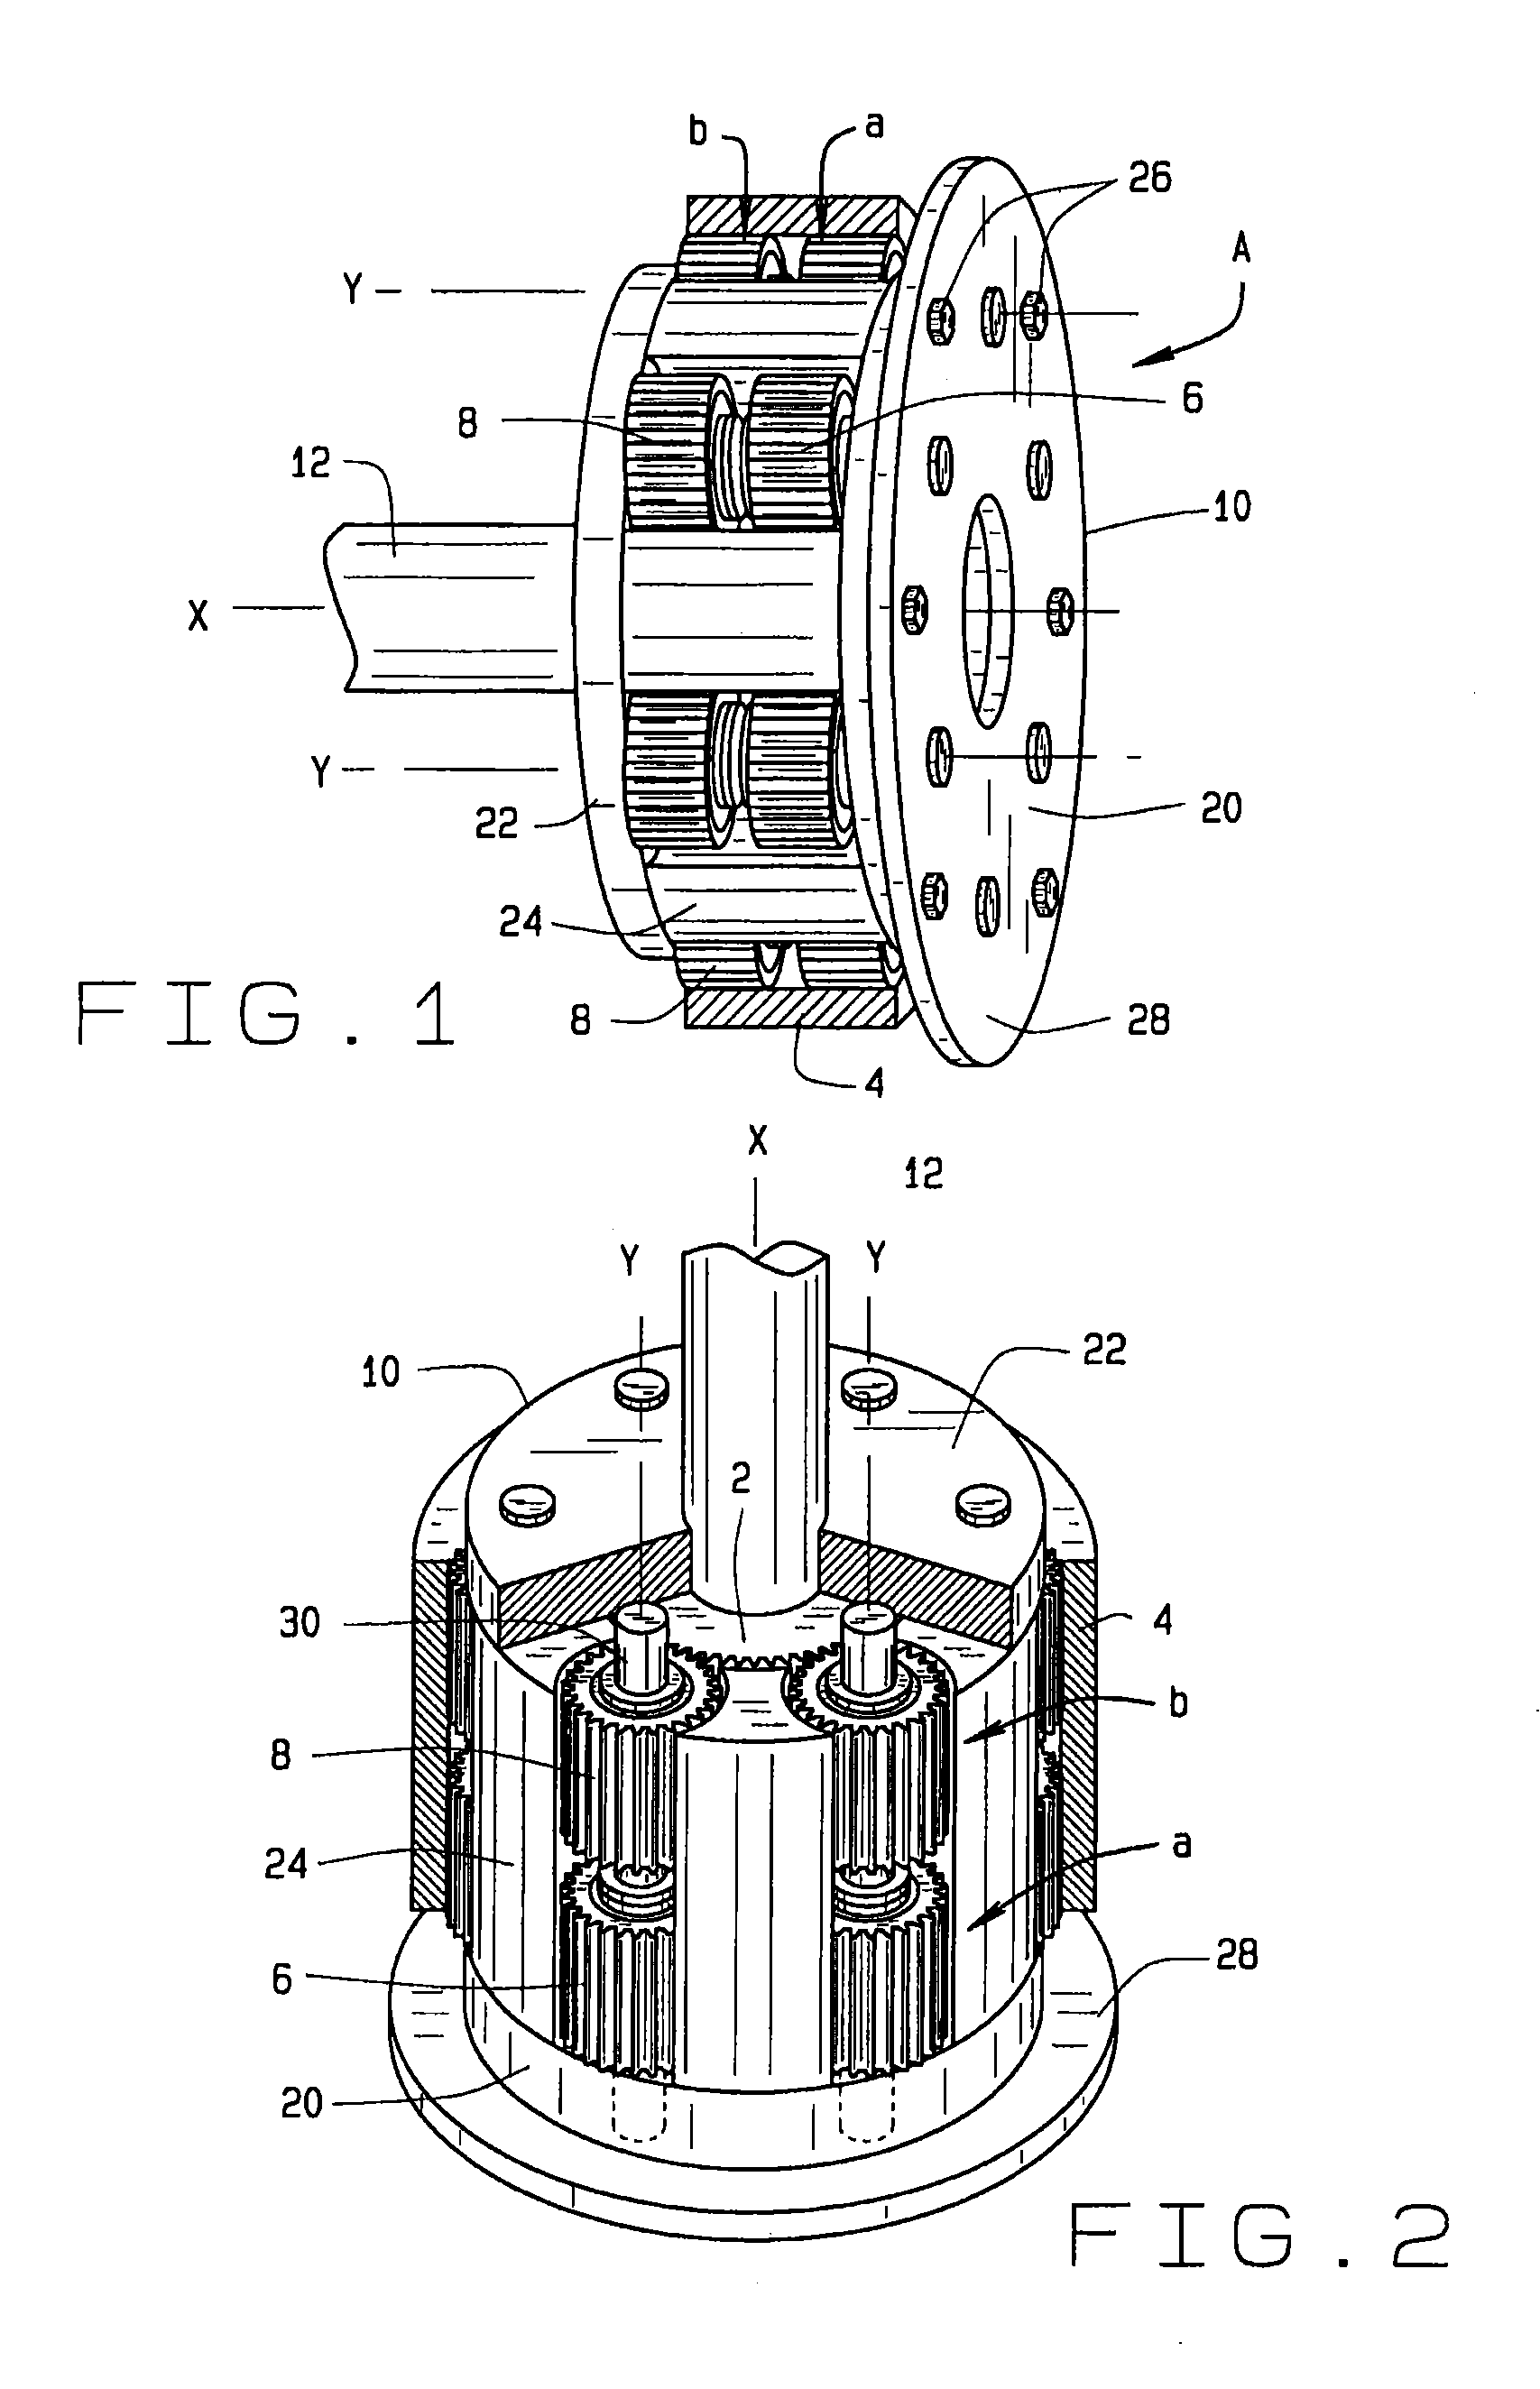 Epicyclic gear system having two arrays of pinions mounted on flexpins with compensation for carrier distortion